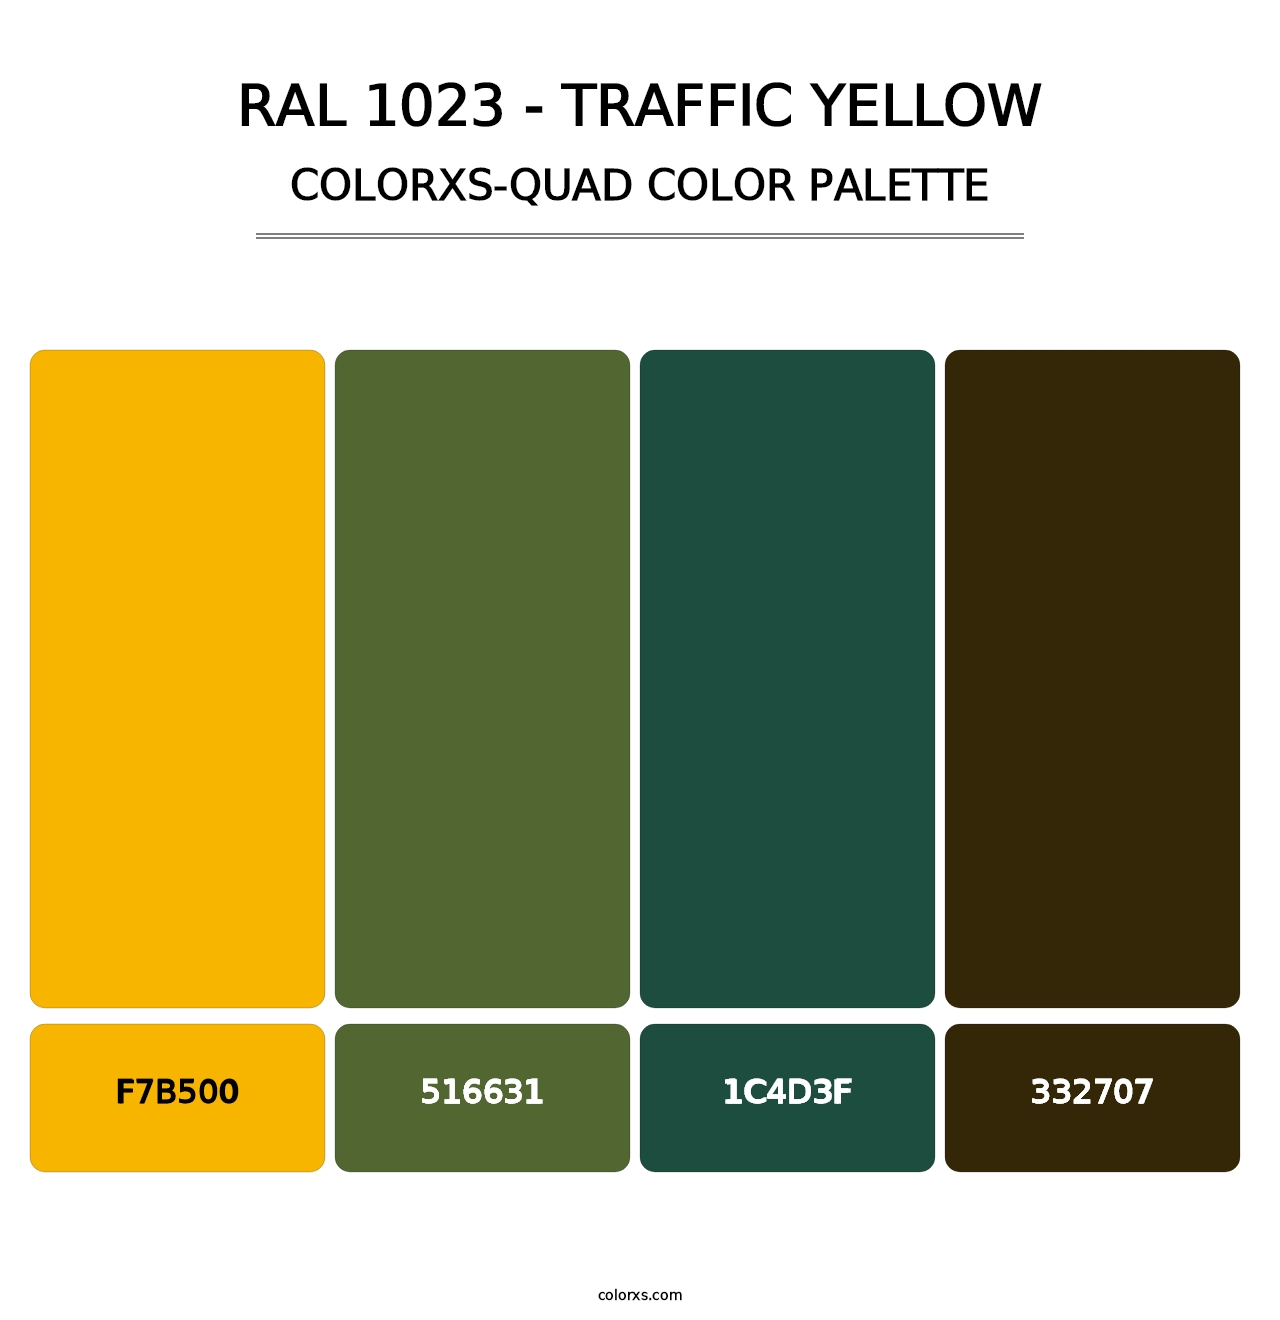 RAL 1023 - Traffic Yellow - Colorxs Quad Palette